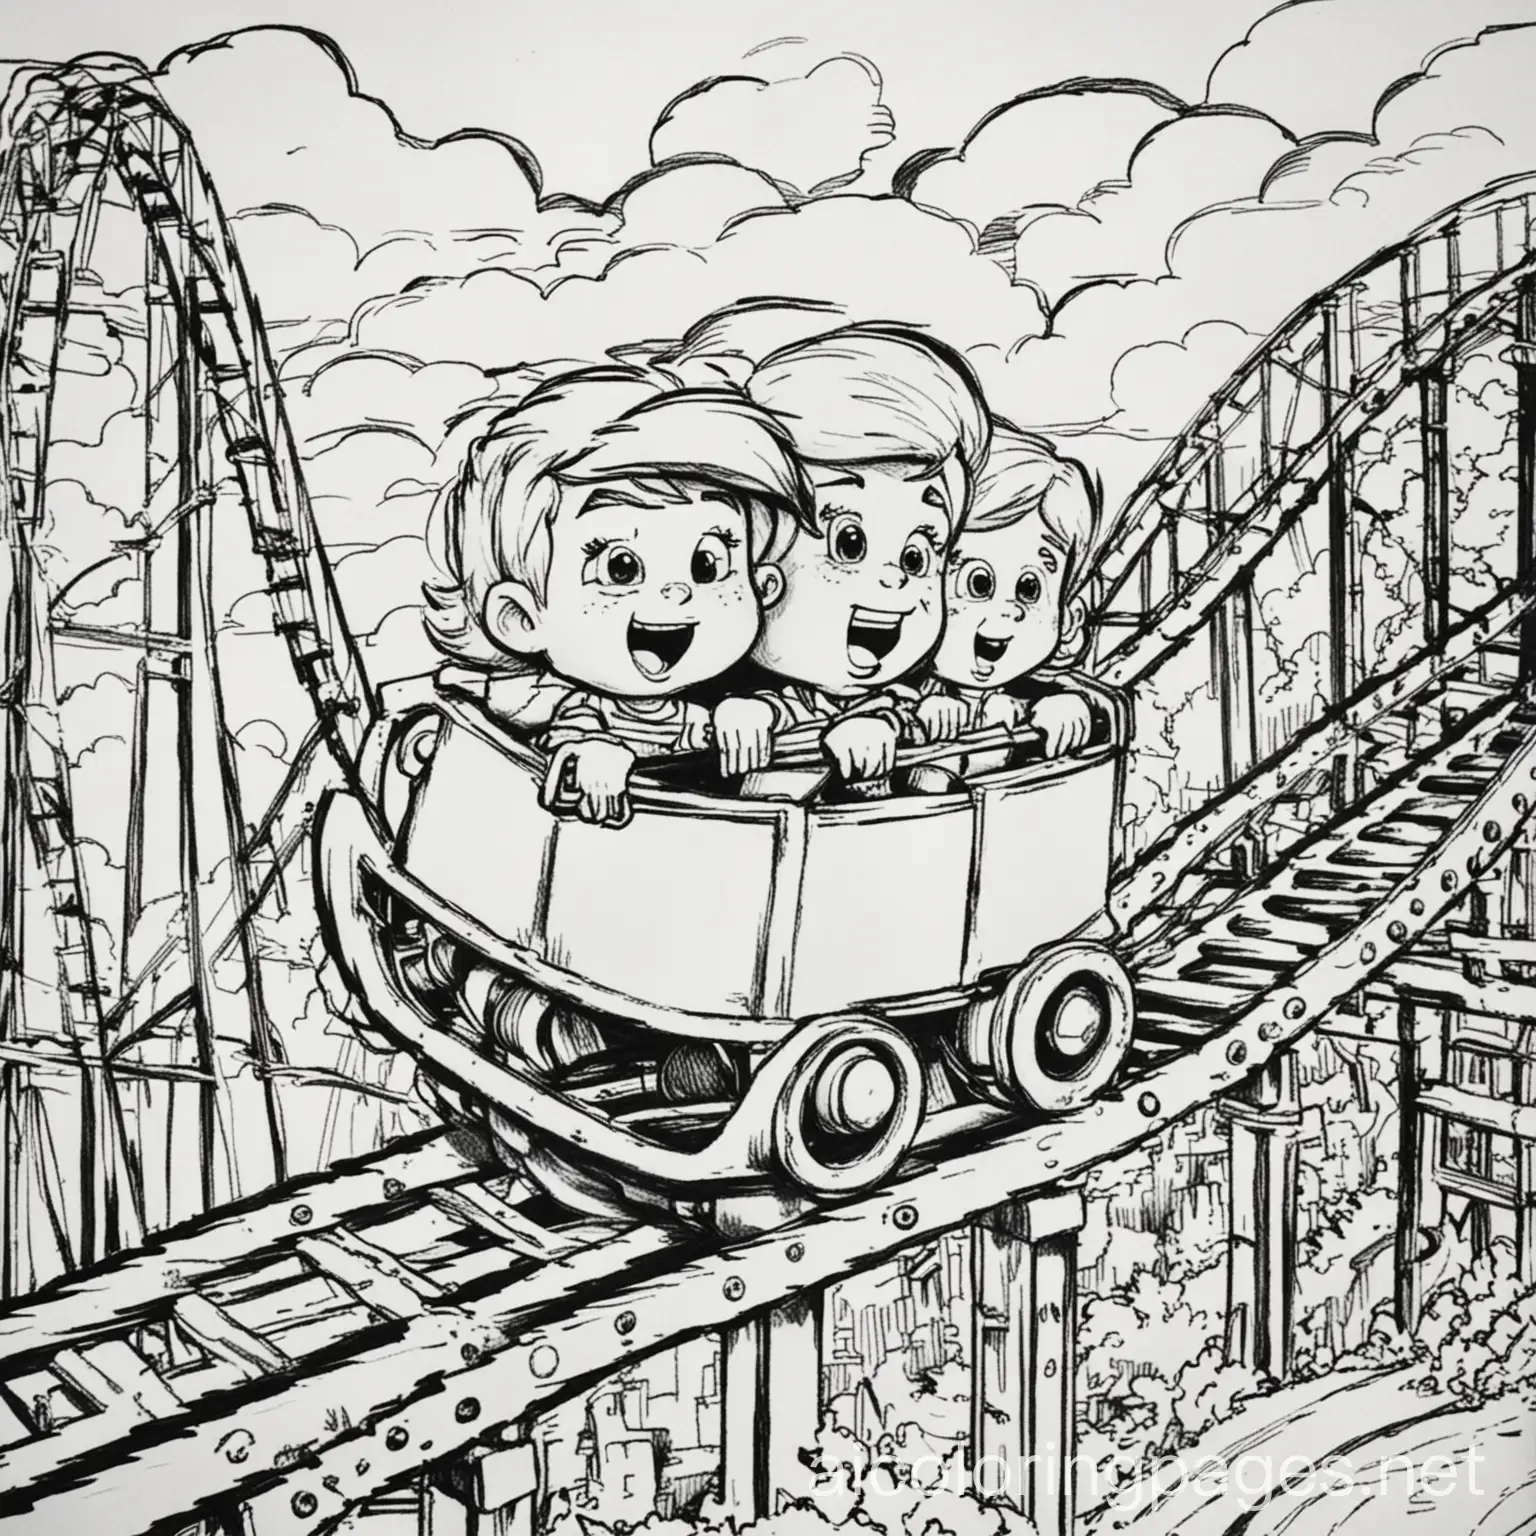 black and white coloring page of little kid roller coaster

, Coloring Page, black and white, line art, white background, Simplicity, Ample White Space. The background of the coloring page is plain white to make it easy for young children to color within the lines. The outlines of all the subjects are easy to distinguish, making it simple for kids to color without too much difficulty